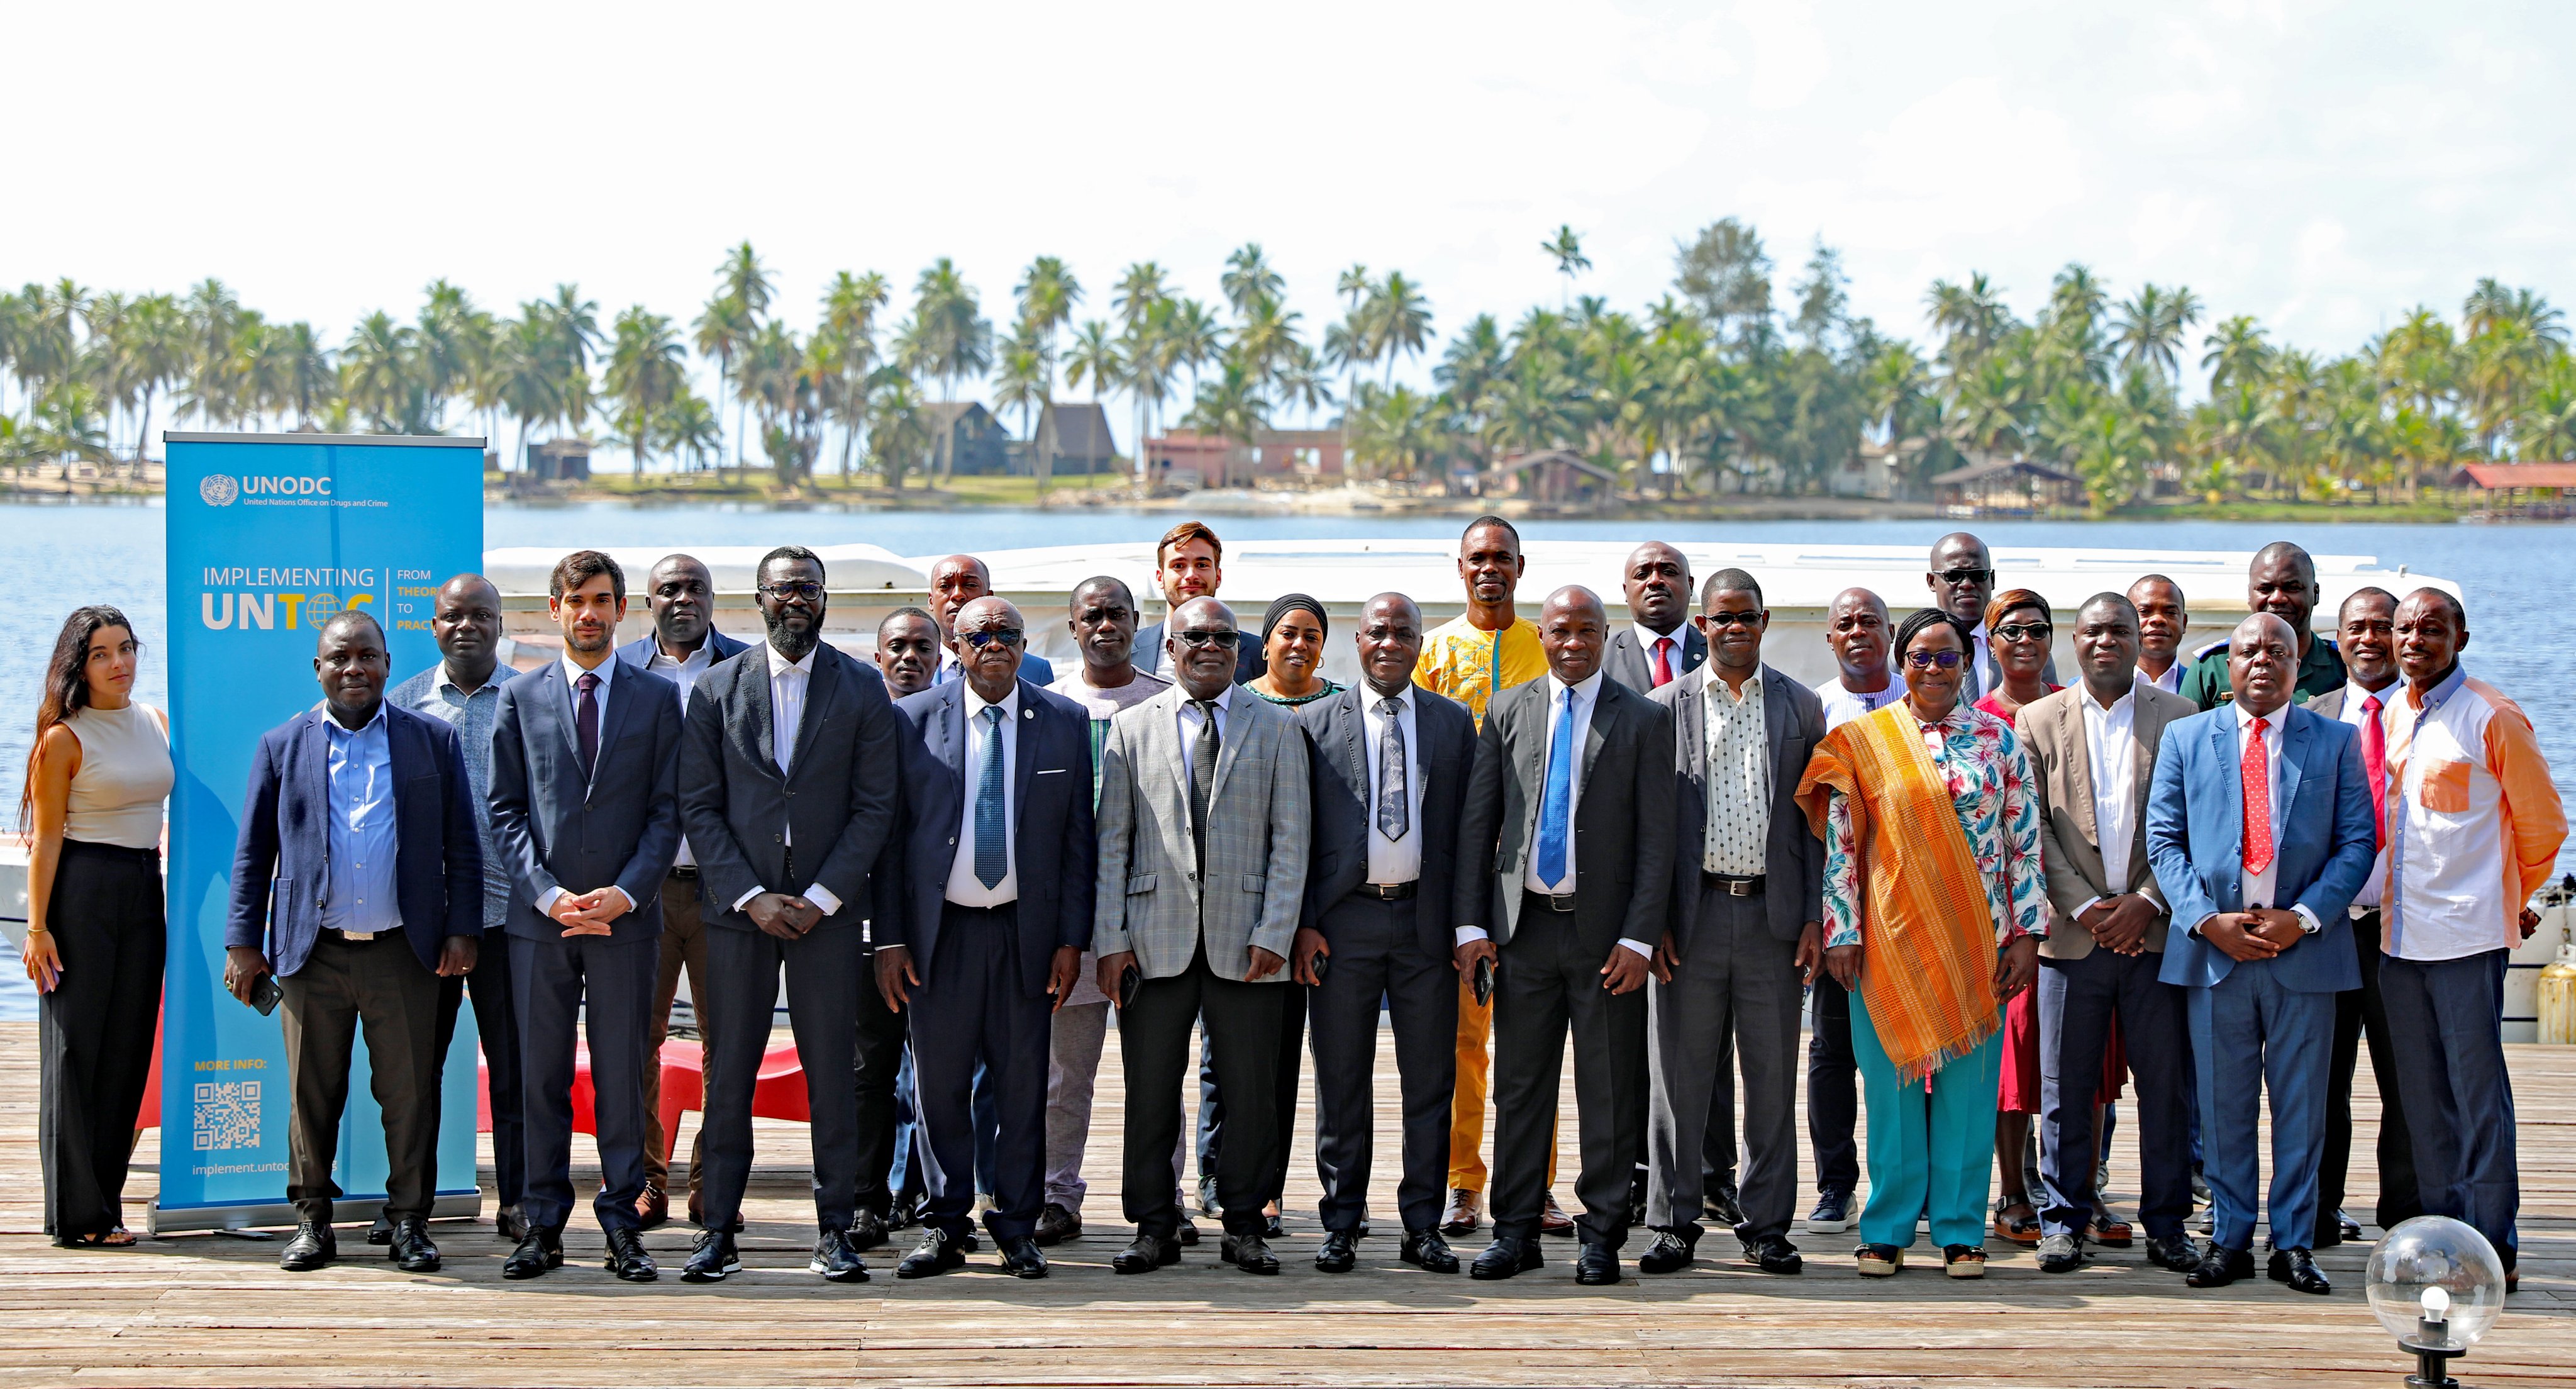 A group photo with participants of a meeting taken outside. On the left side of the photo, the roll up of the Global Programme on Implementing the Organized Crime Convention is visible. In the background, palm trees, several houses and the sea.